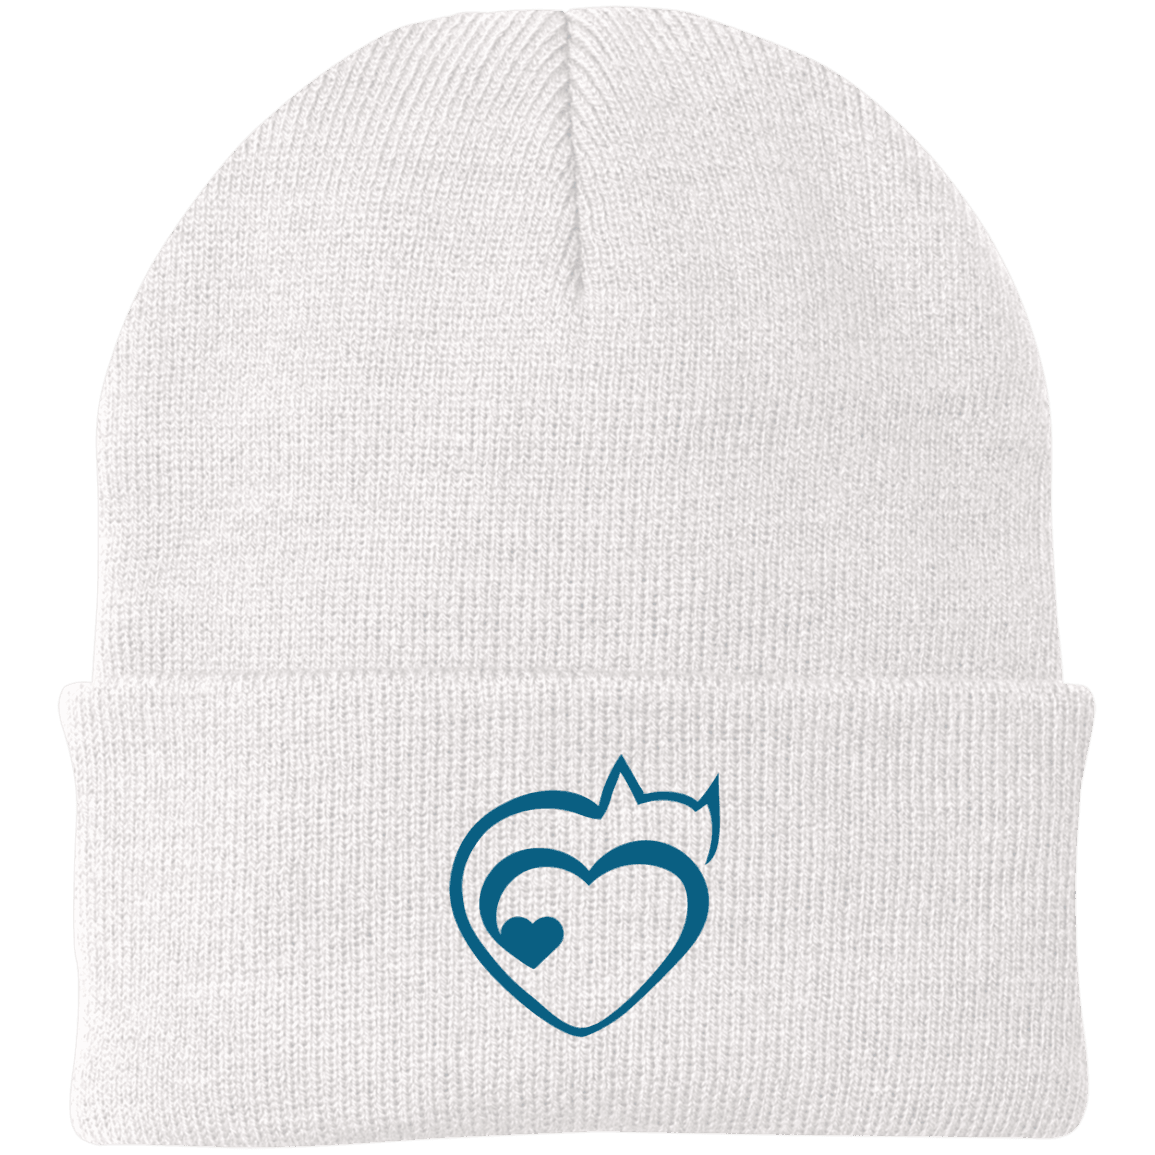 Designs by MyUtopia Shout Out:Cat Heart Embroidered Knit Cap,White / One Size,Hats